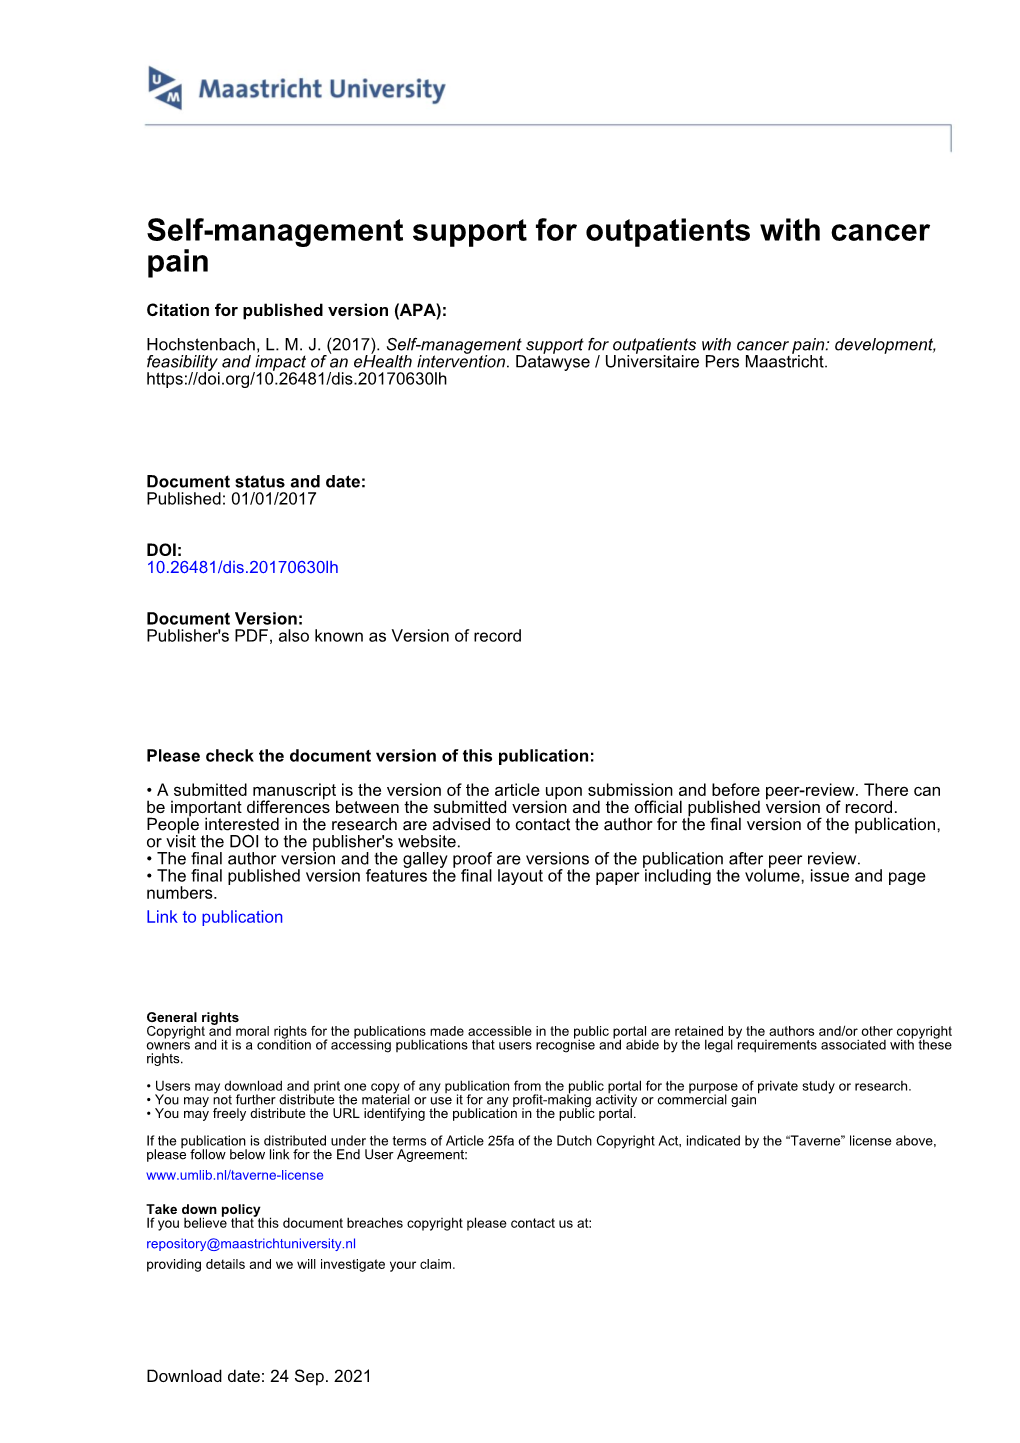 Self-Management Support for Outpatients with Cancer Pain